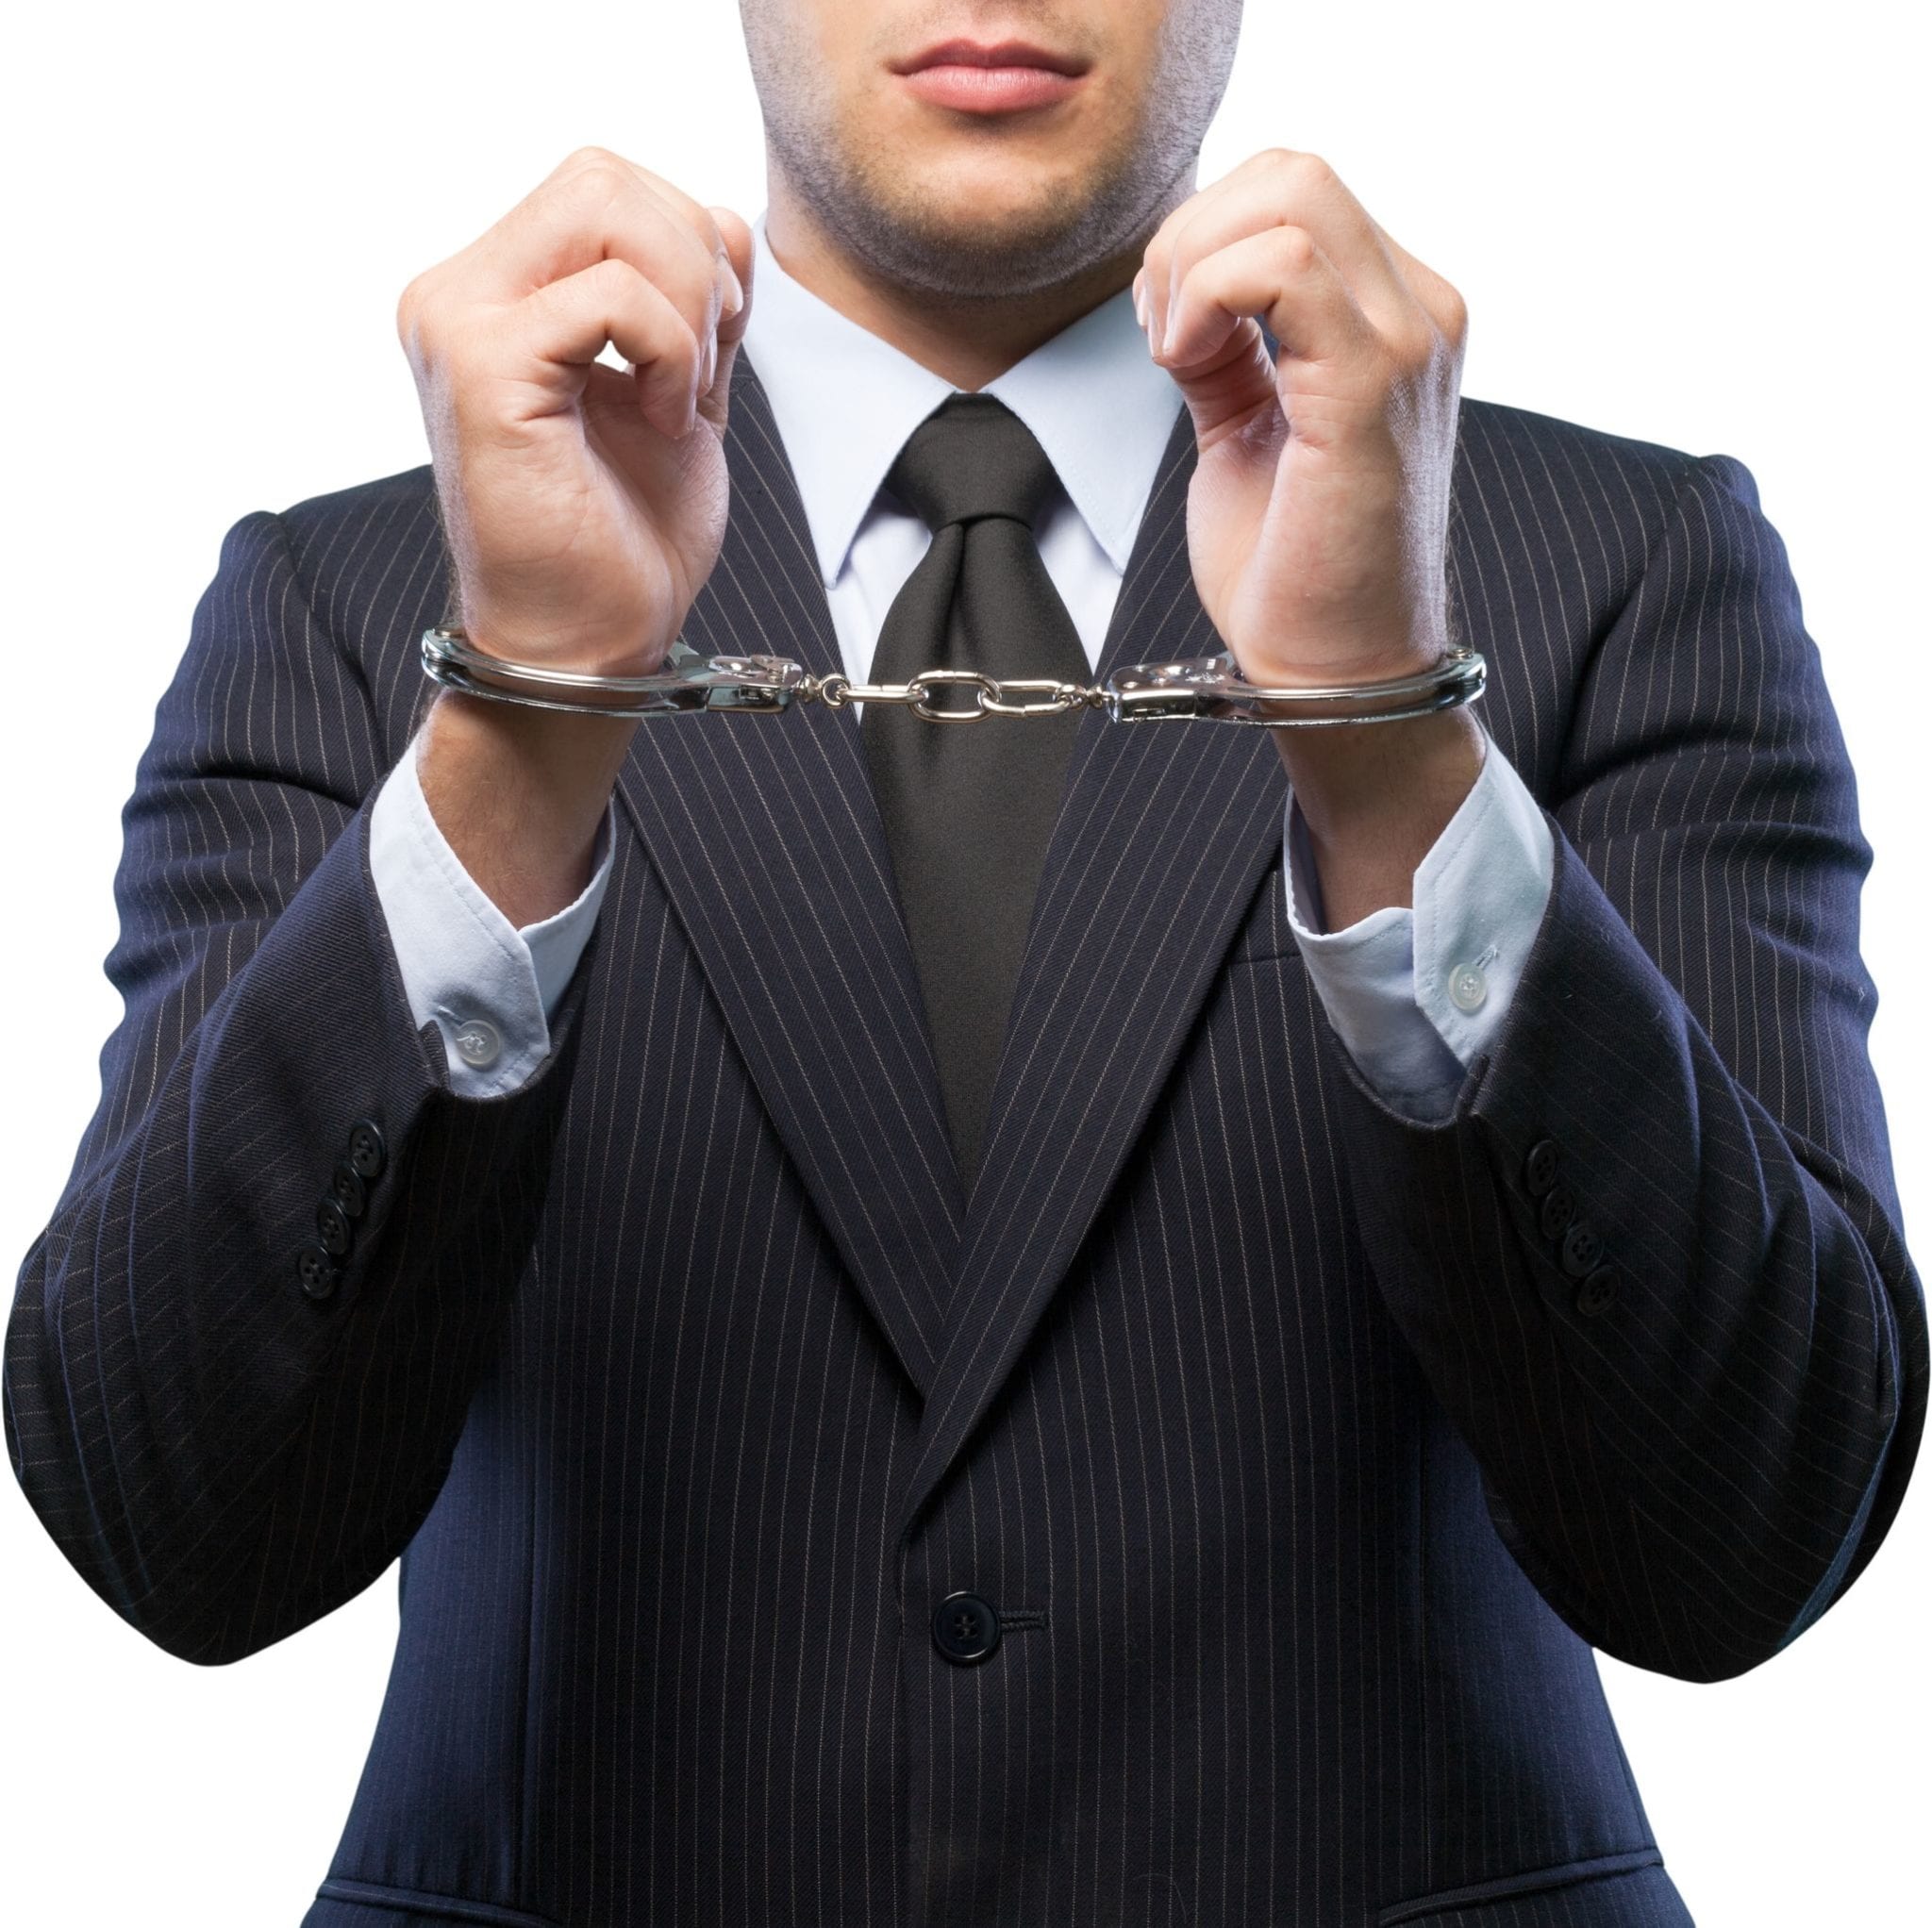 Defending Yourself Against Minnesota Bribery Charges